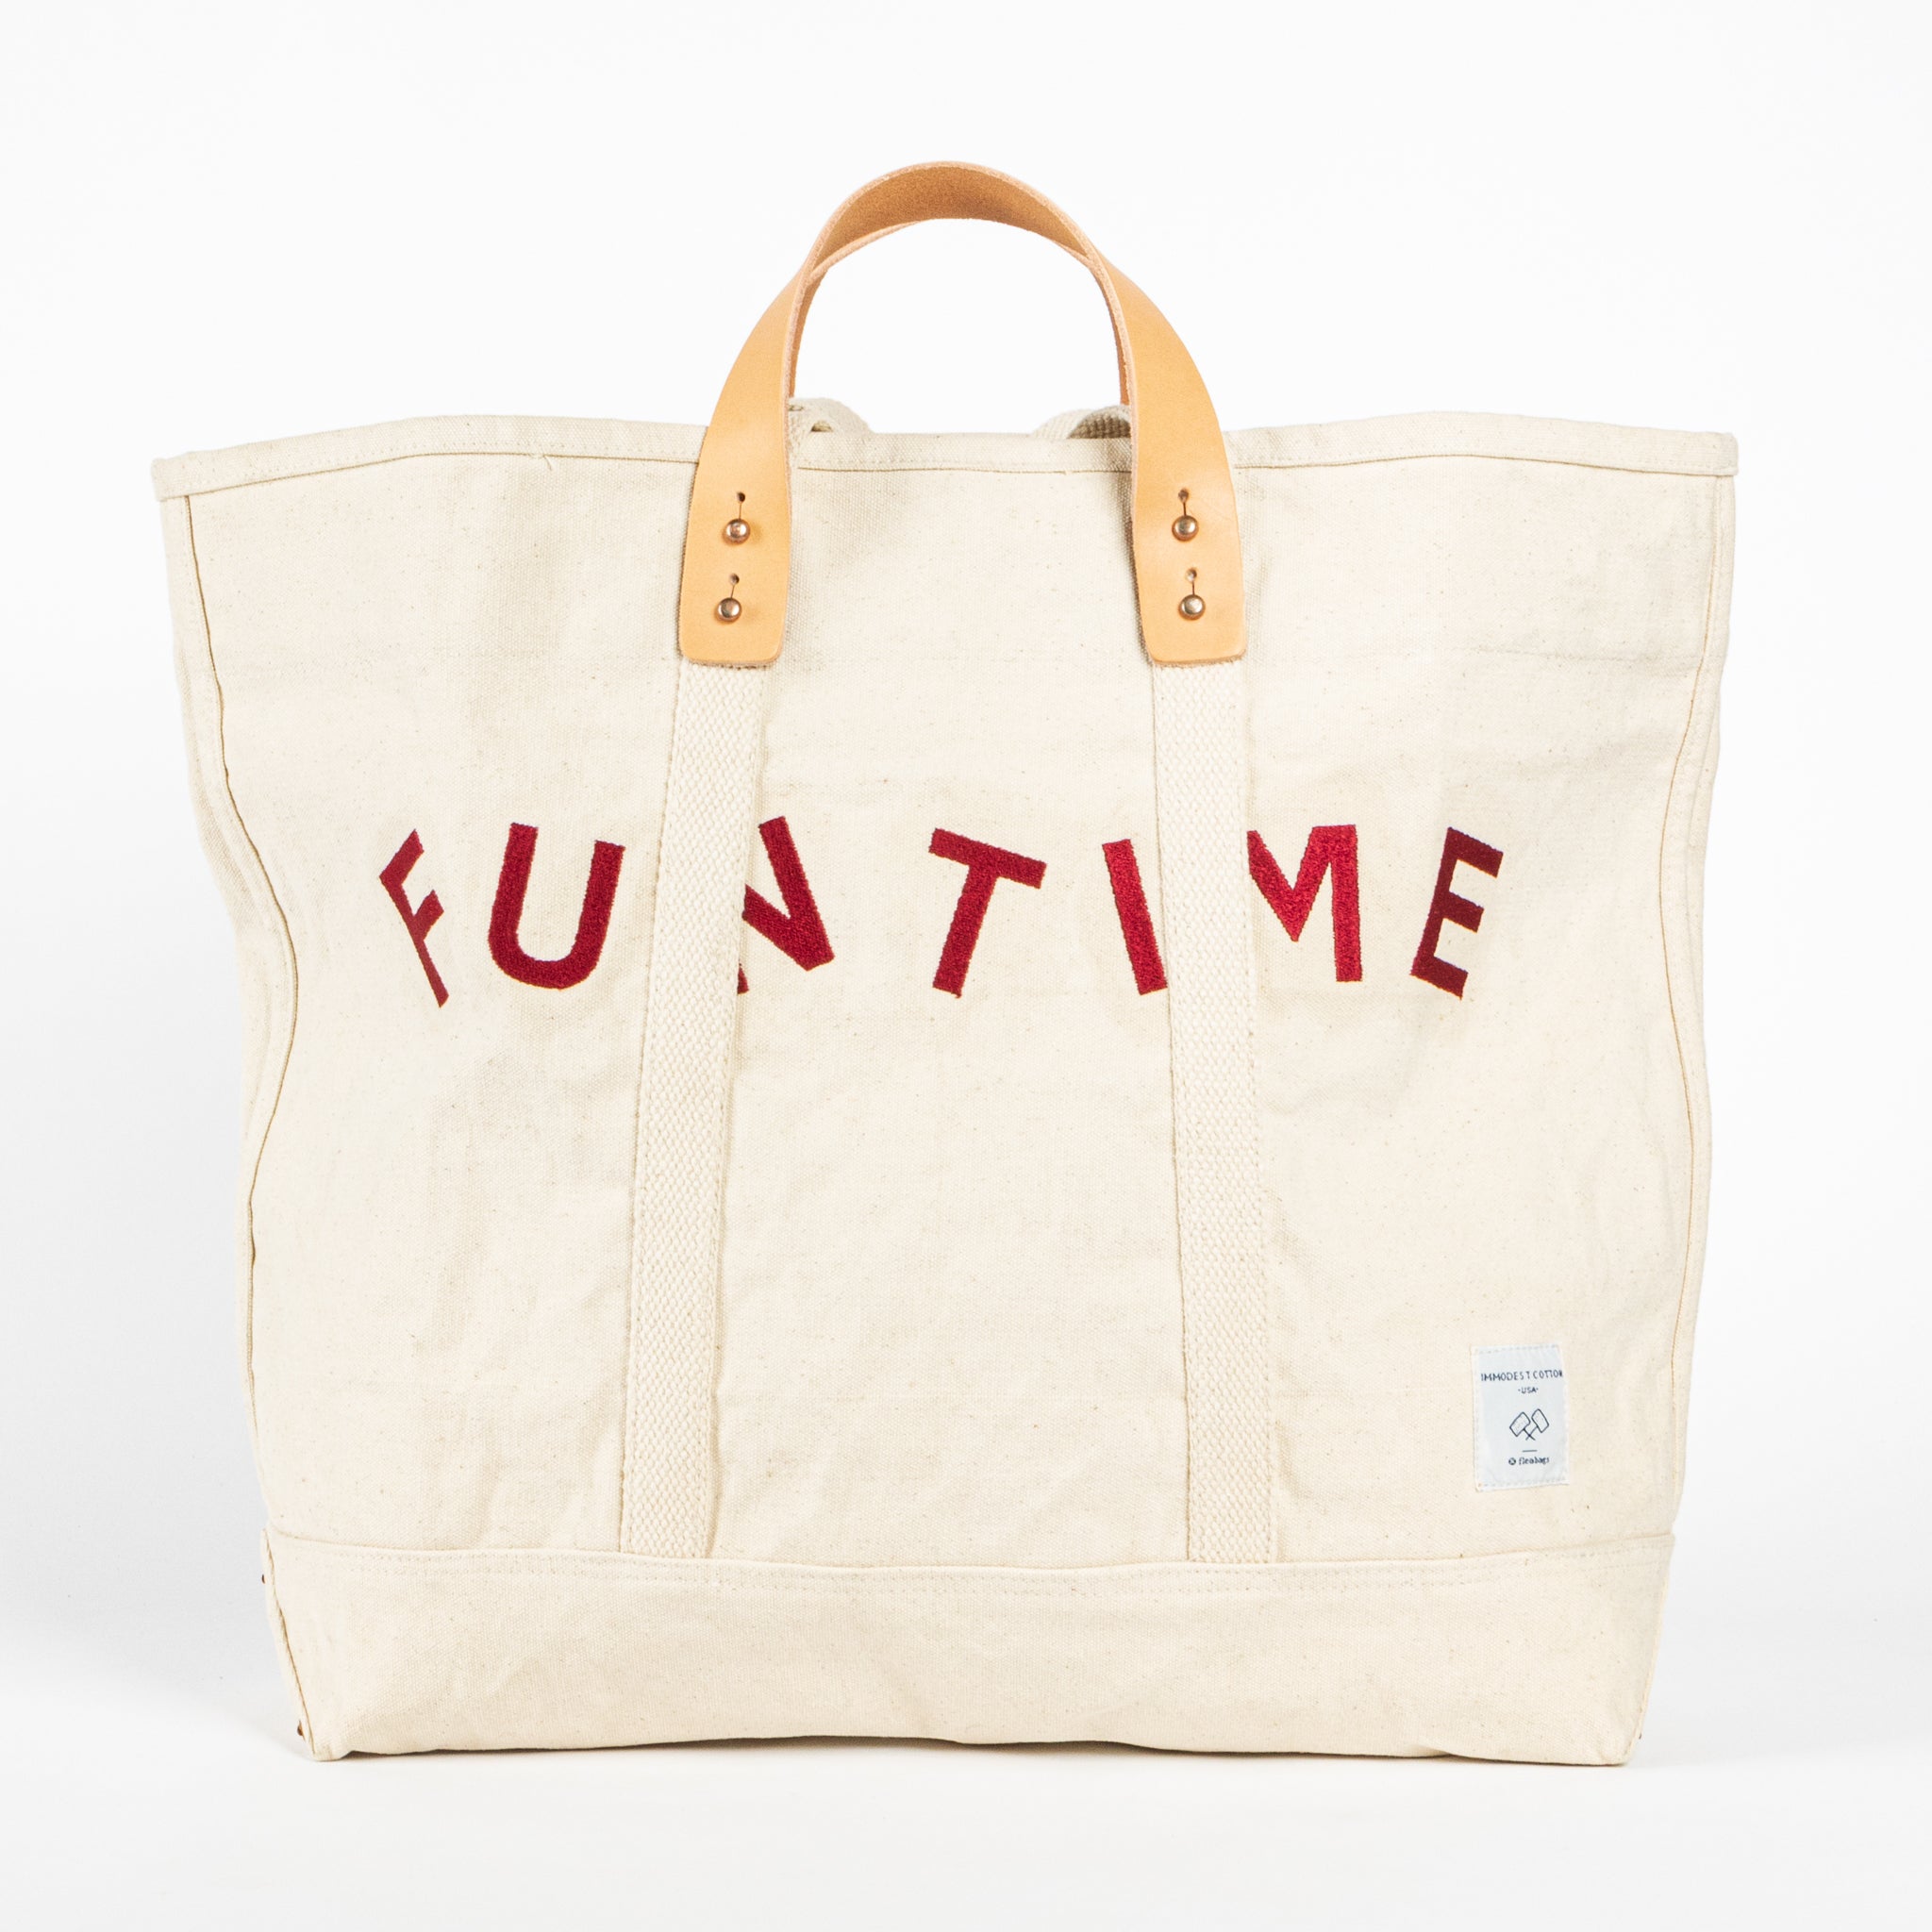 Immodest Cotton Tote in Fun Times